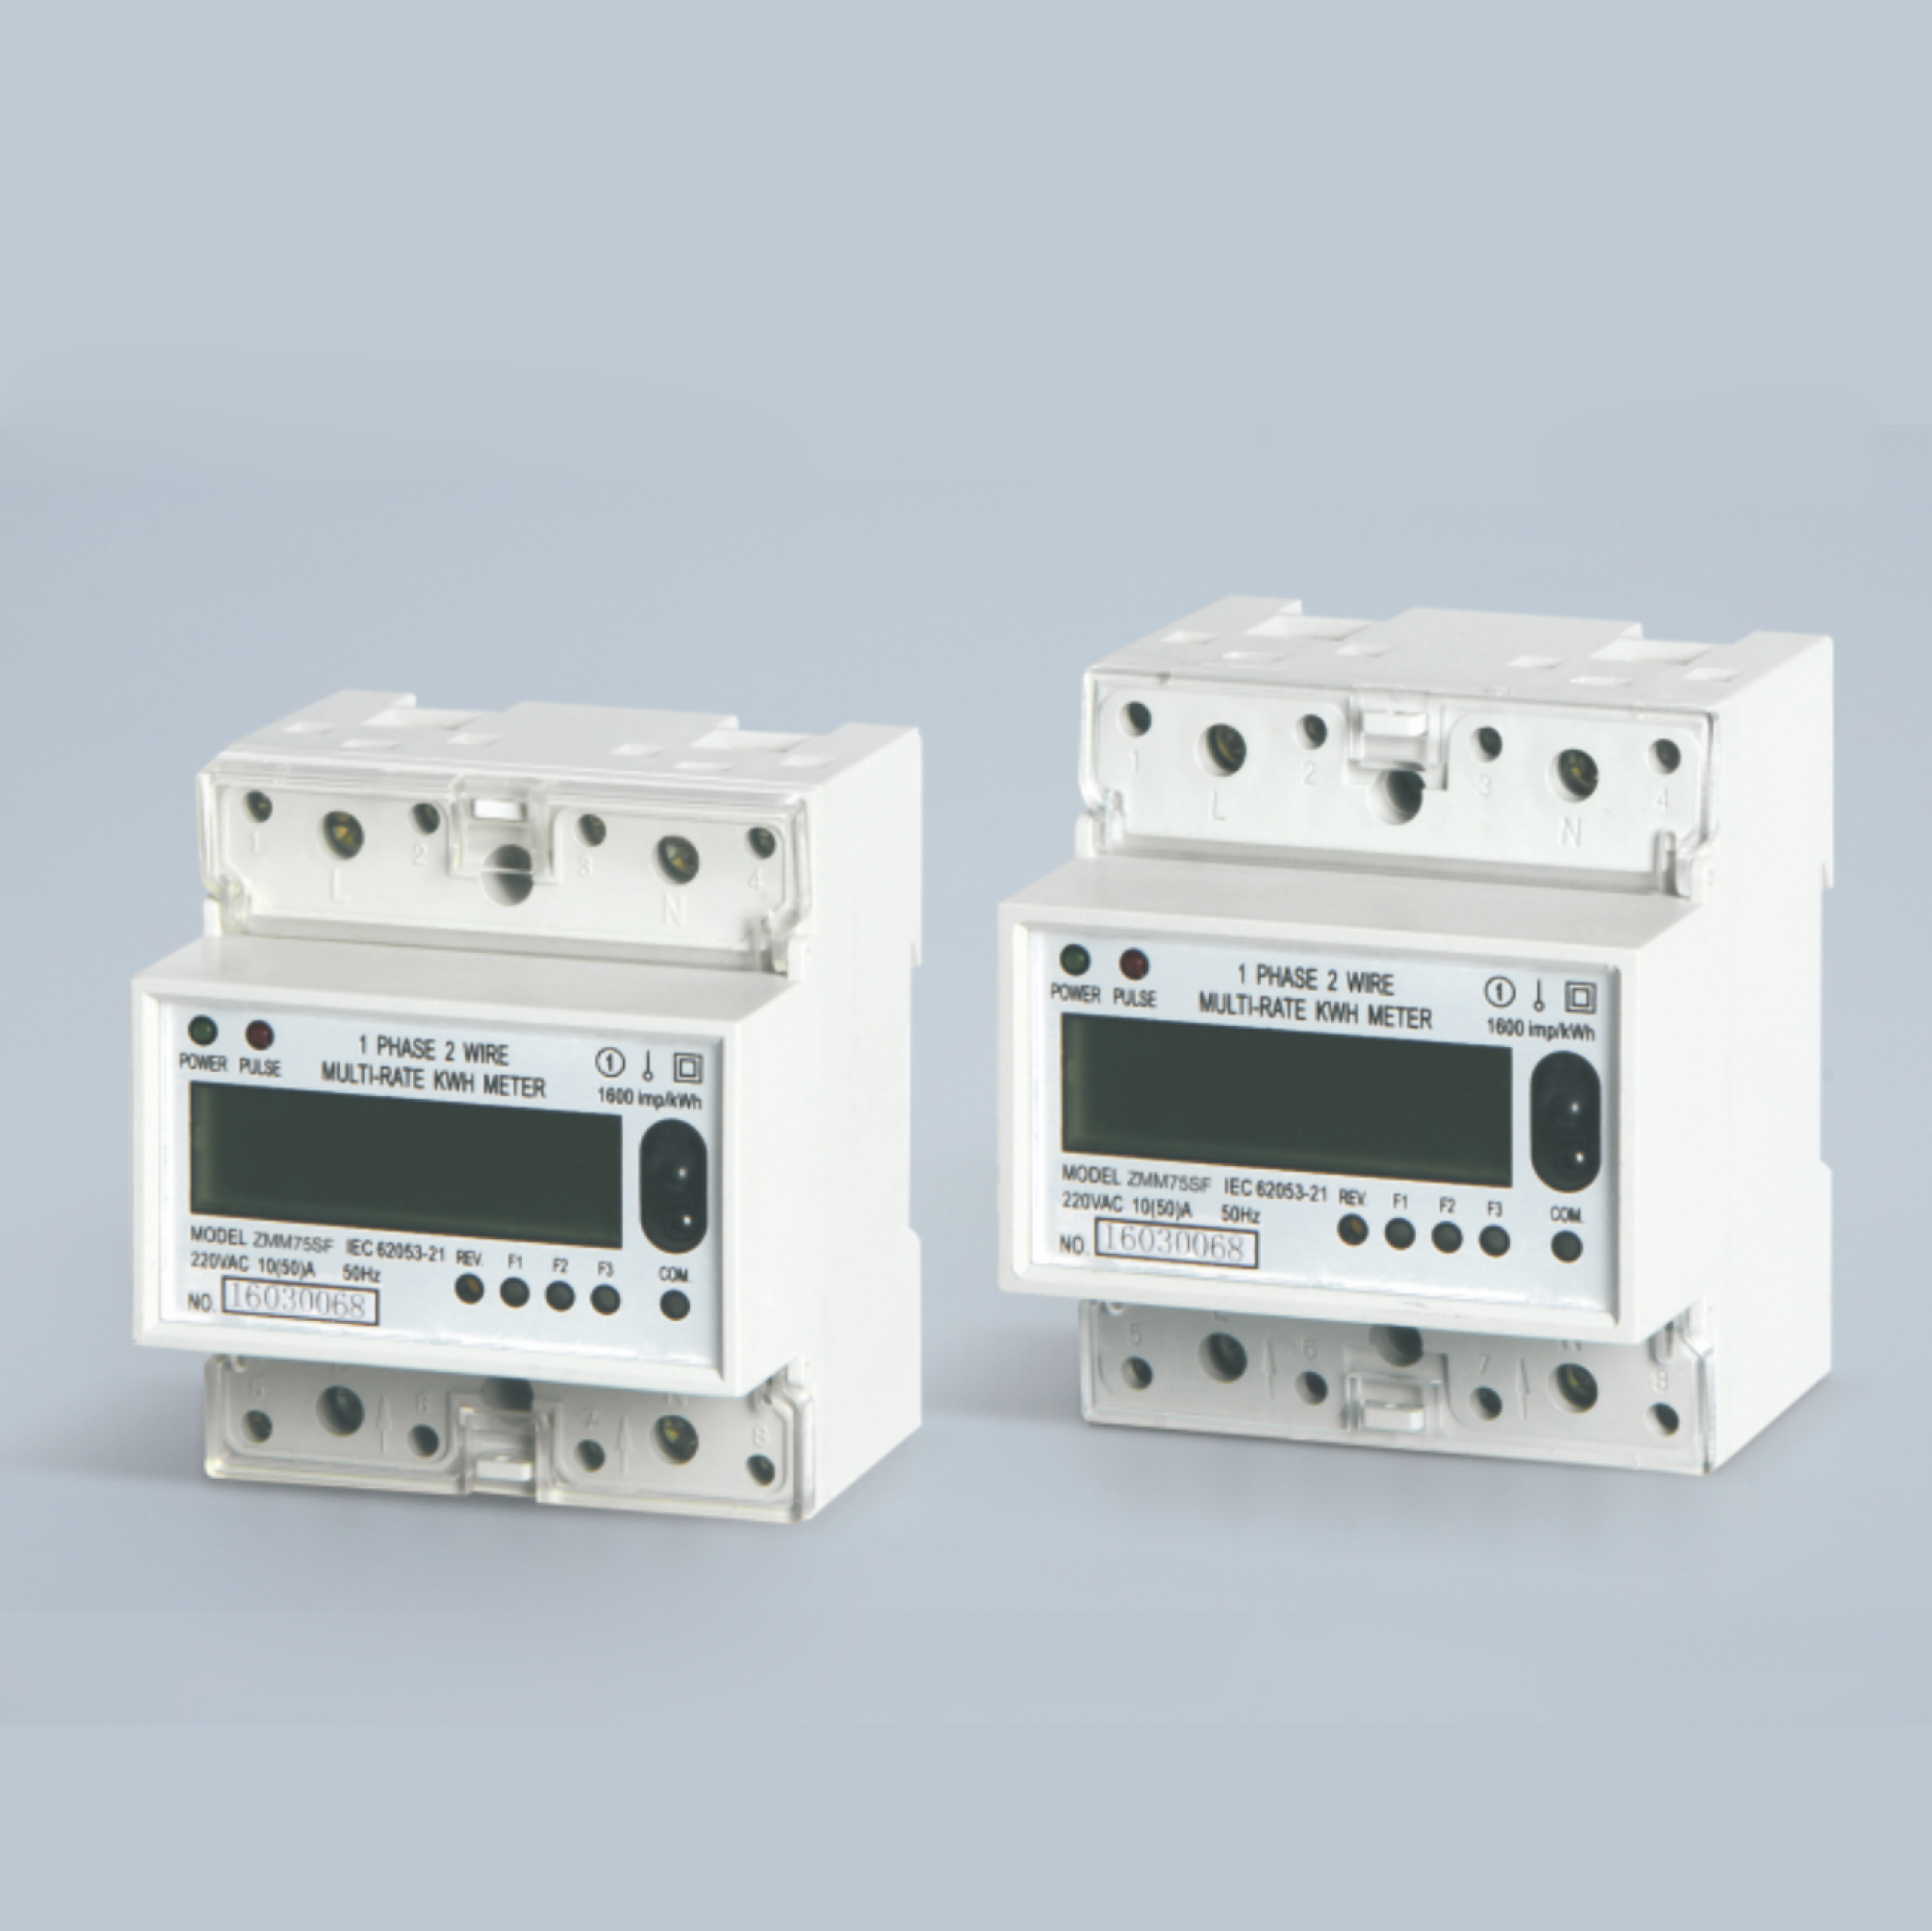 ZMM75SF Single Phase Electronic DIN-rail Active Energy Meter